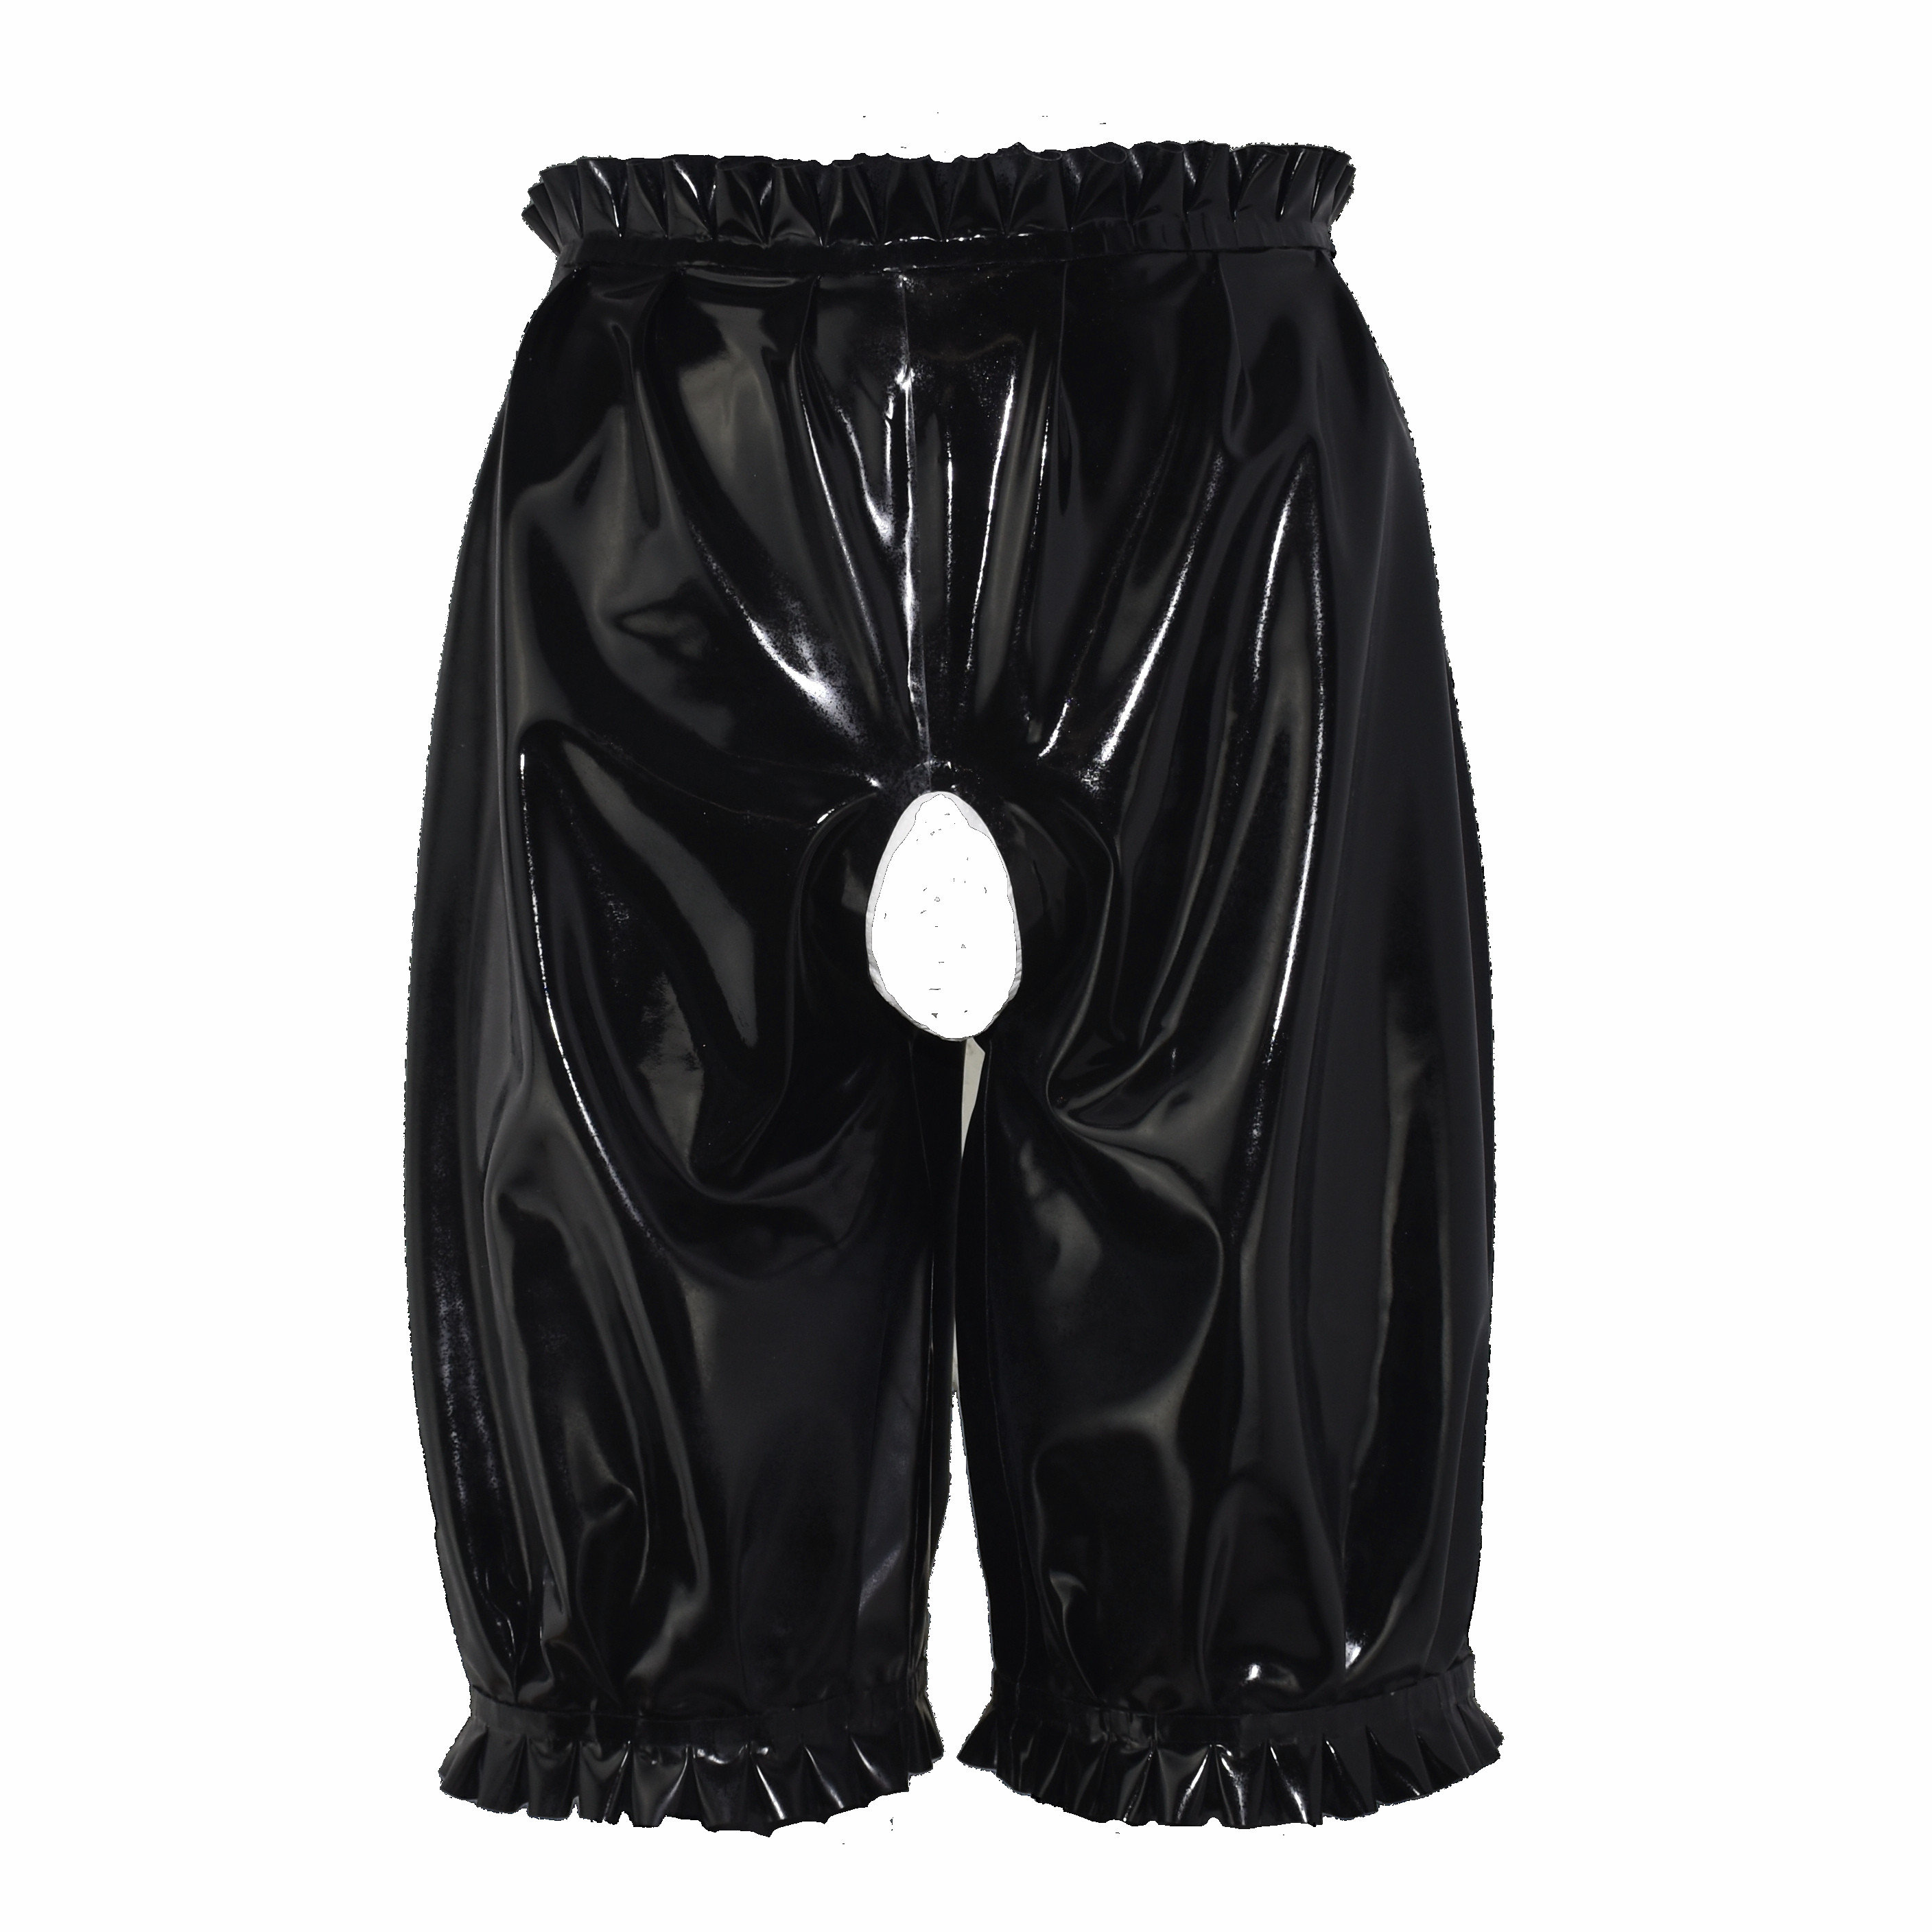 Latex Pants With Ruffles, Open Crotch, Hand Made Size 3XL 0.4 Mm